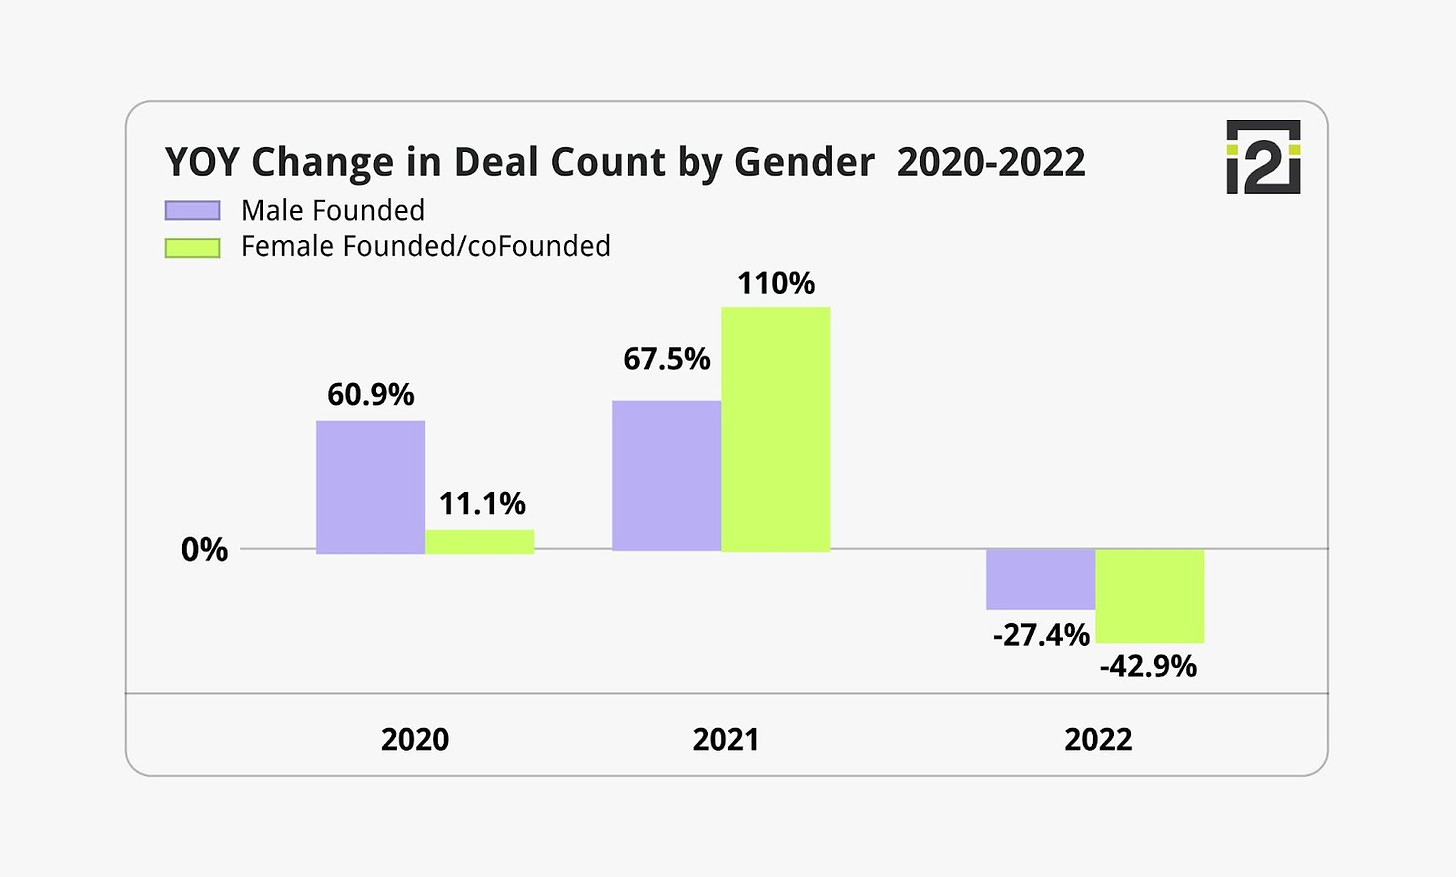 YOY Change in Deal Count by Gender 2020 - 2022